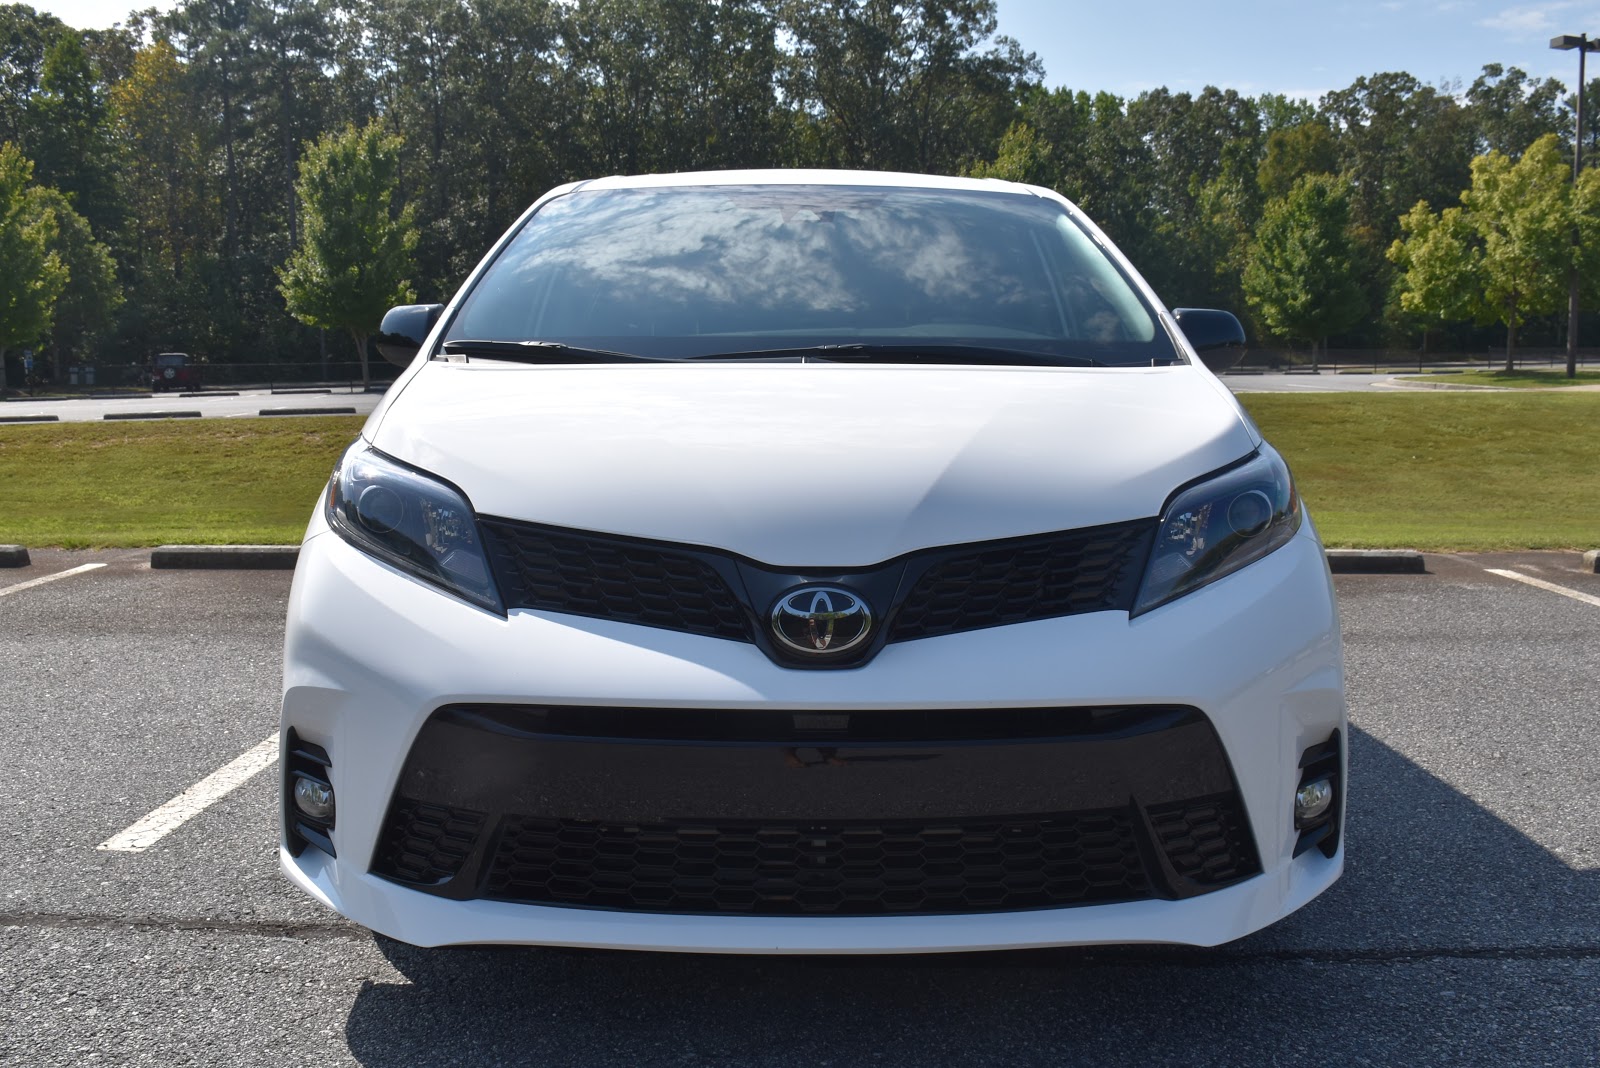 The Sporty Van: Top 6 Things I Loved About the 2020 Toyota Sienna SE